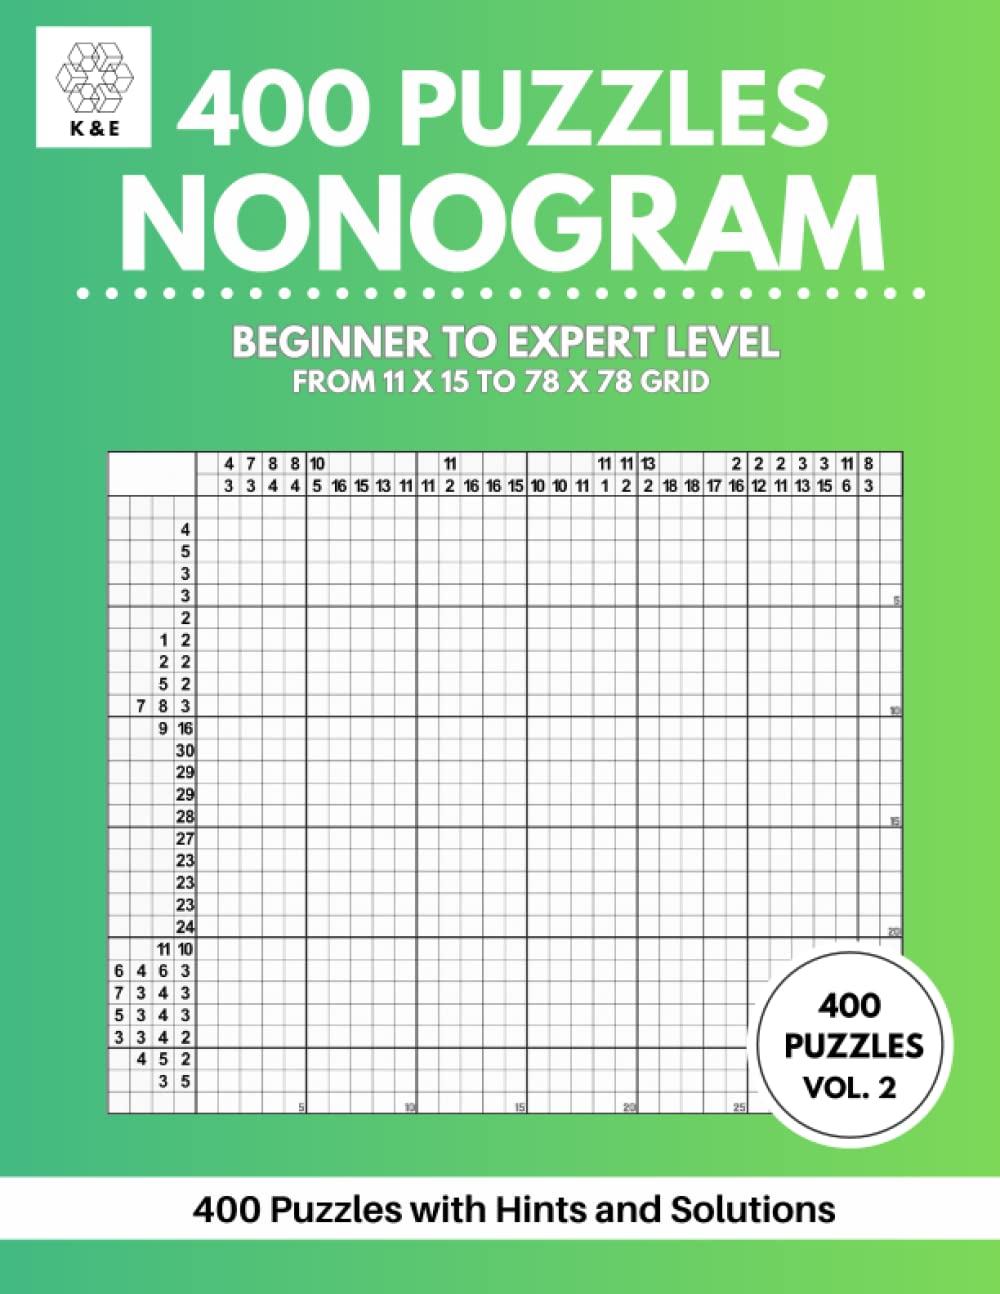 Nonogram Puzzle Book with 400 Easy to Expert Level Puzzles: Griddlers Picture Cross Picross Hanjie Logic Puzzle Book